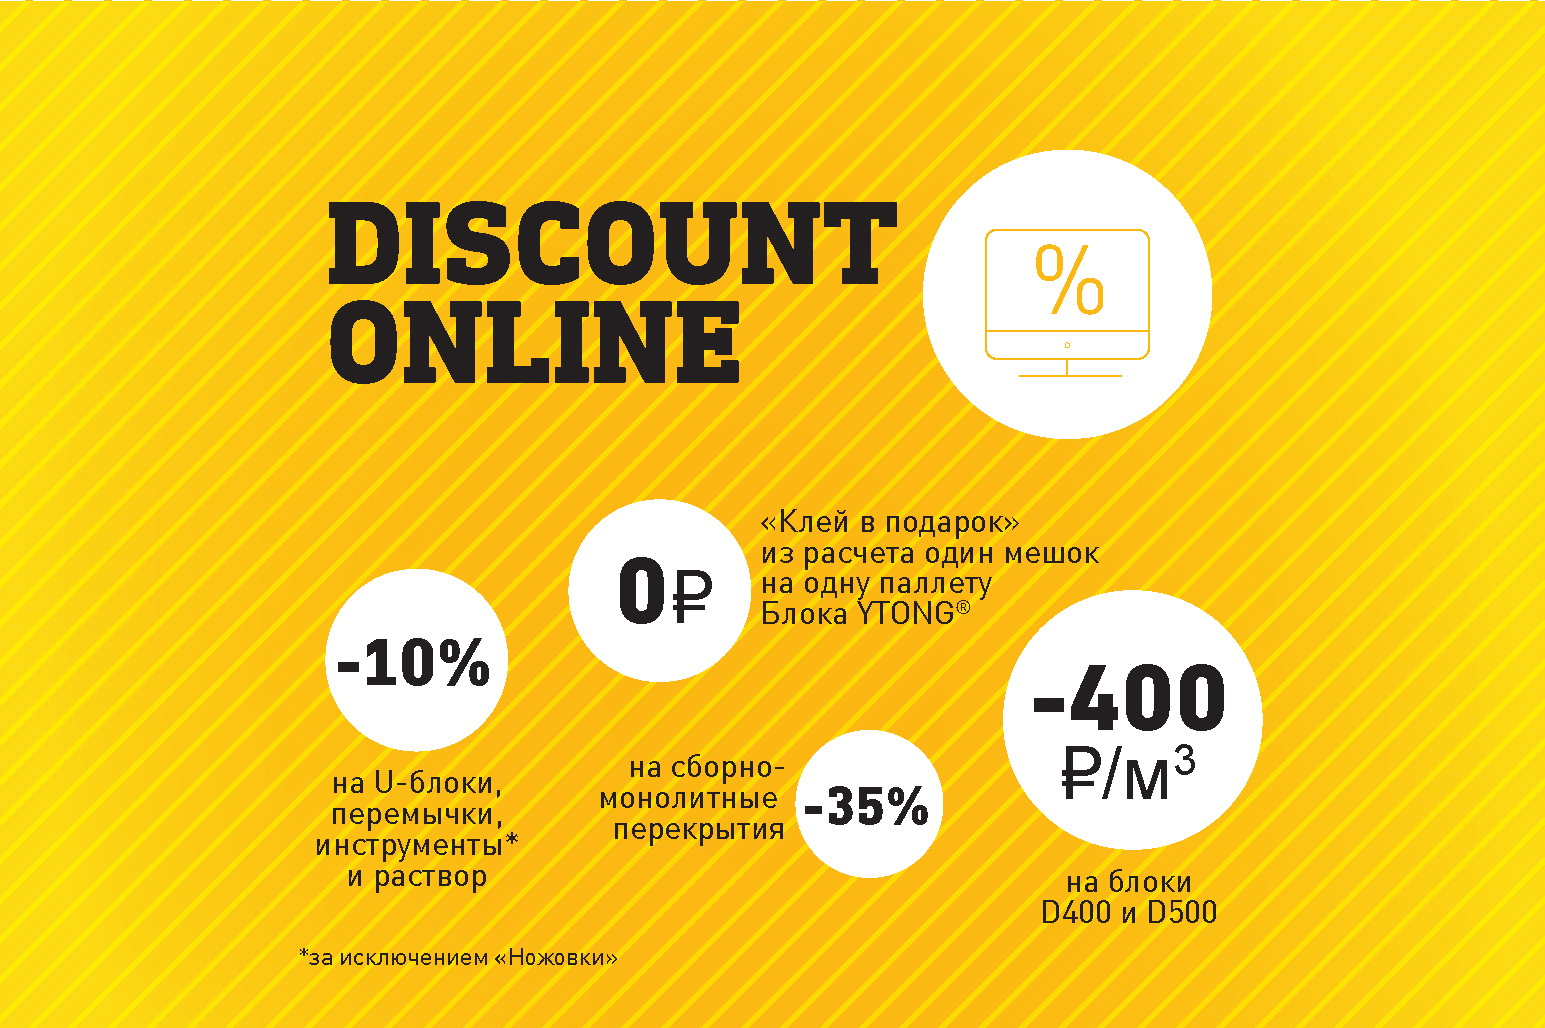   Ytong: DISCOUNT ONLINE 